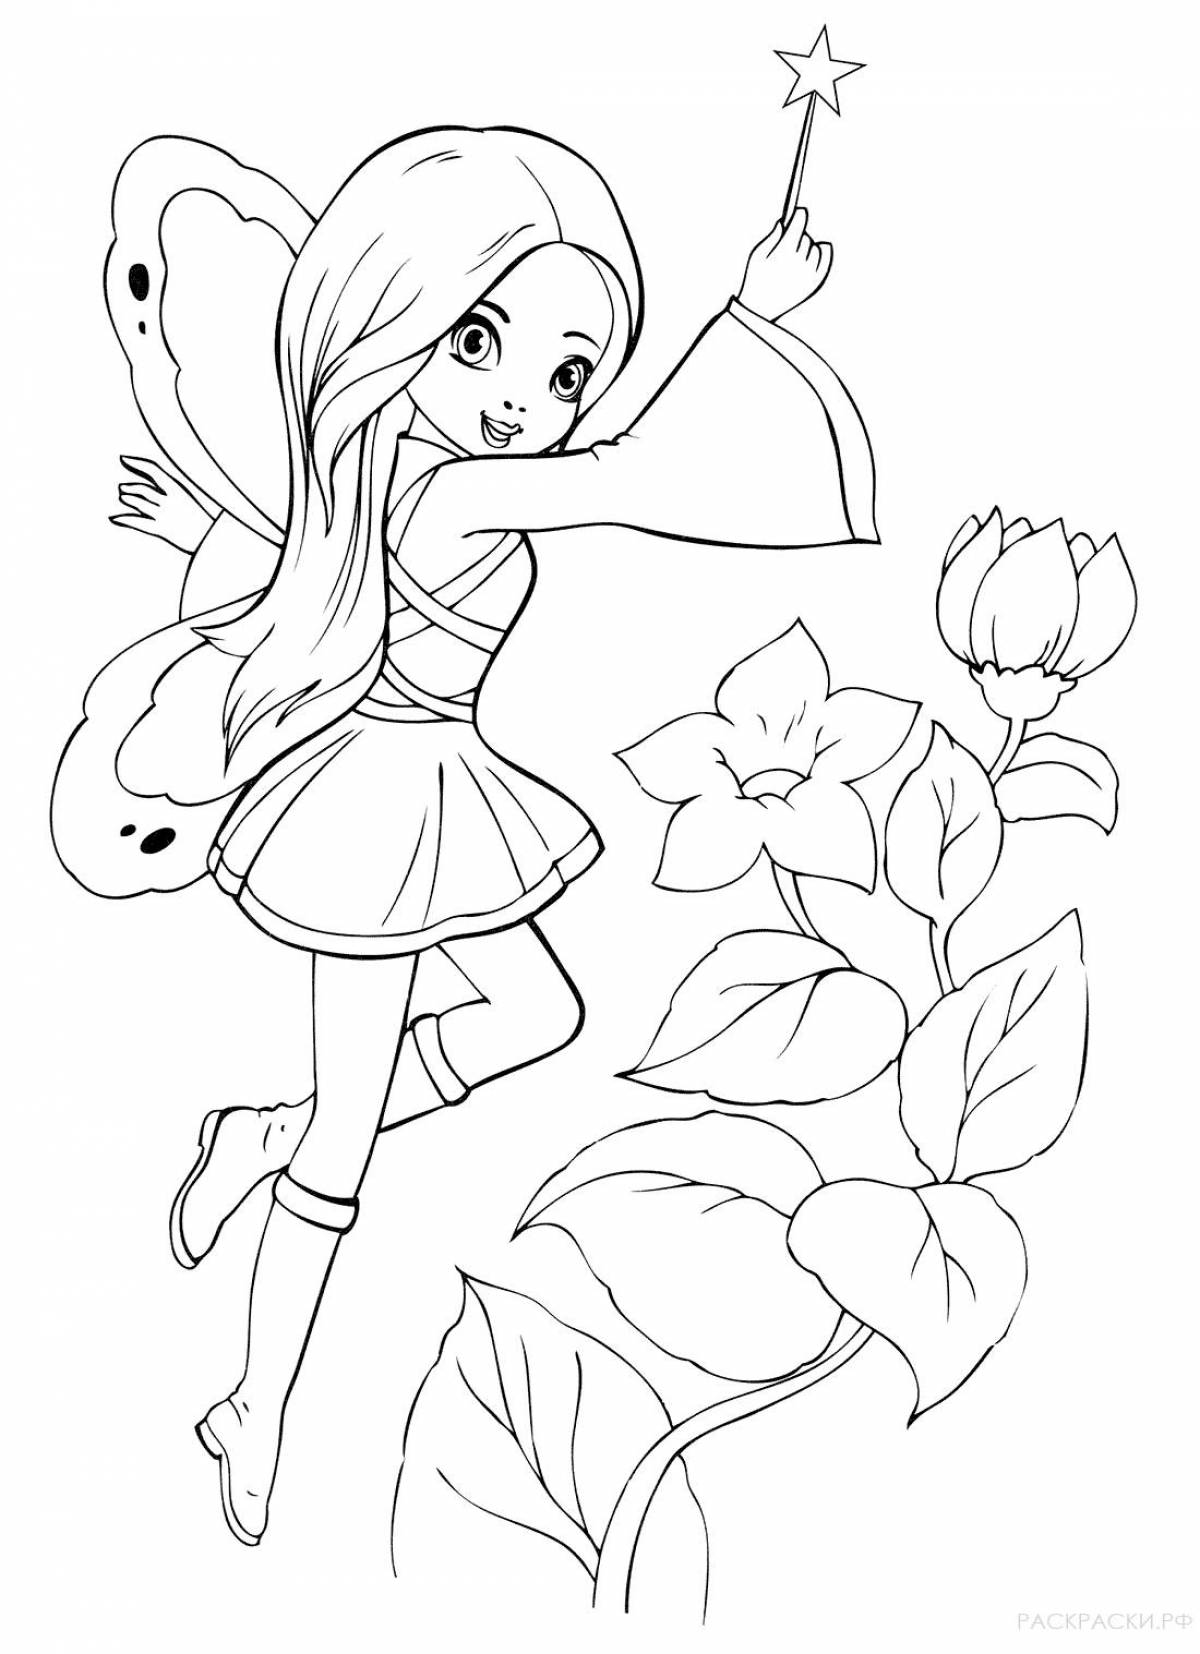 Coloured coloring pages for girls